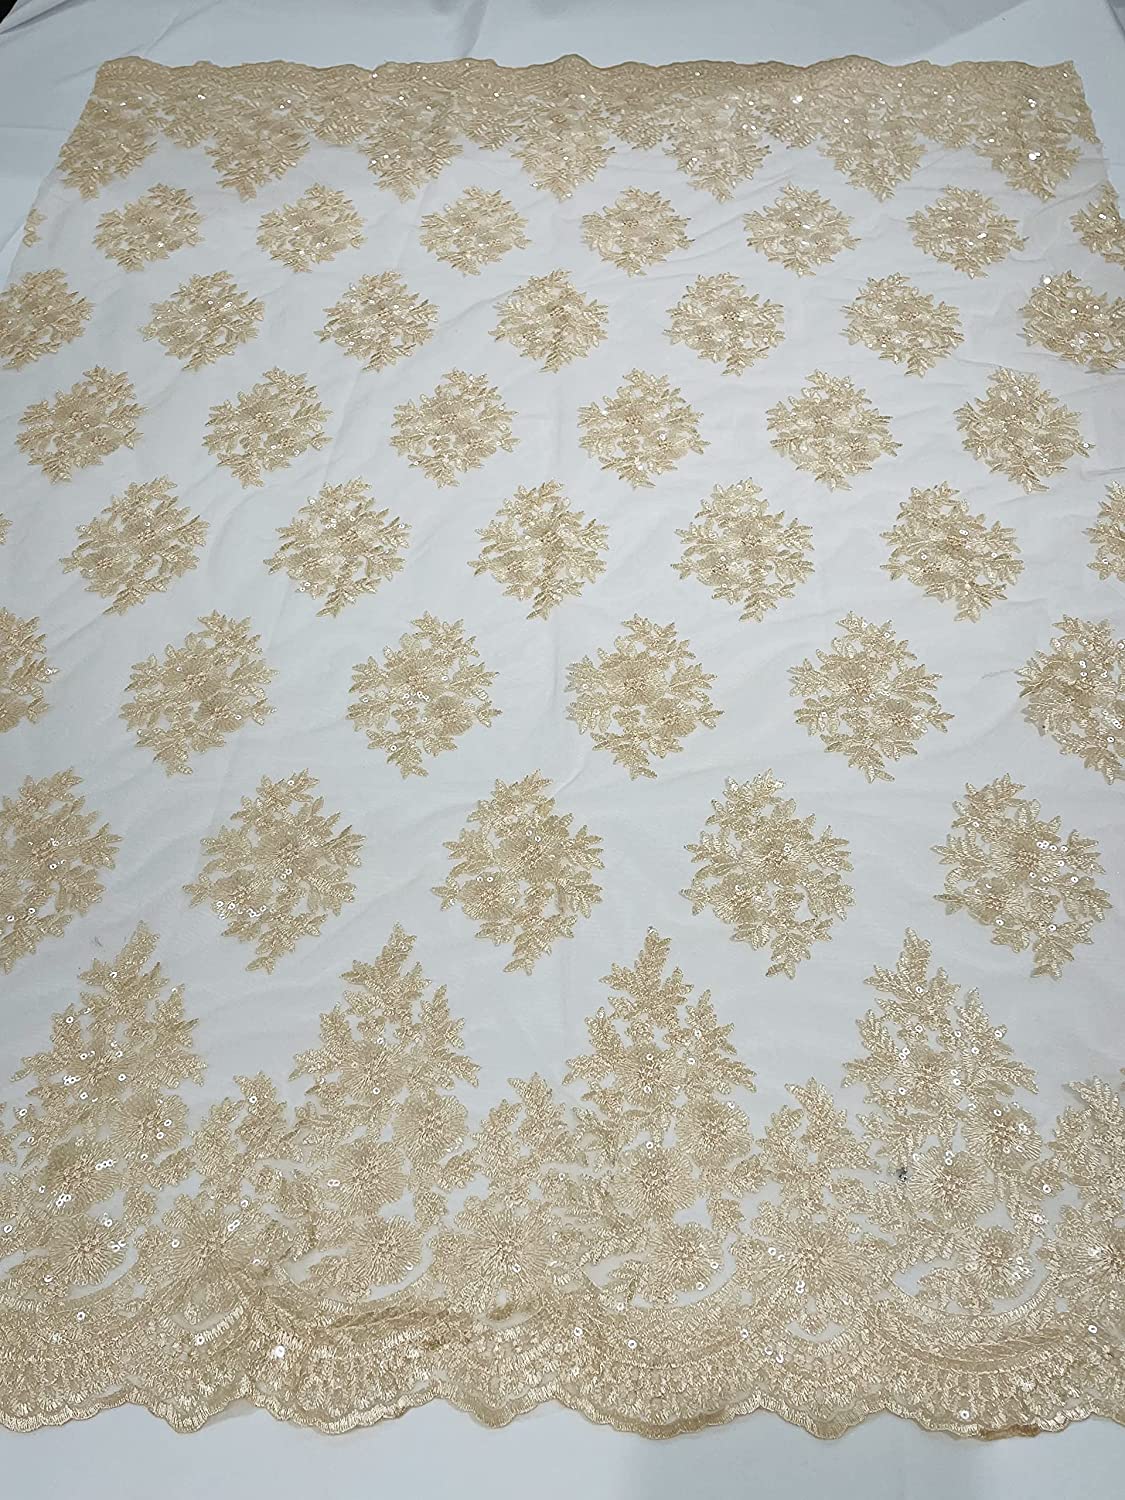 Emma Design Floral Corded Embroider with Sequins, Solid and with Glitter Mesh Lace Fabric (1 Yard, Solid Mesh Peach)